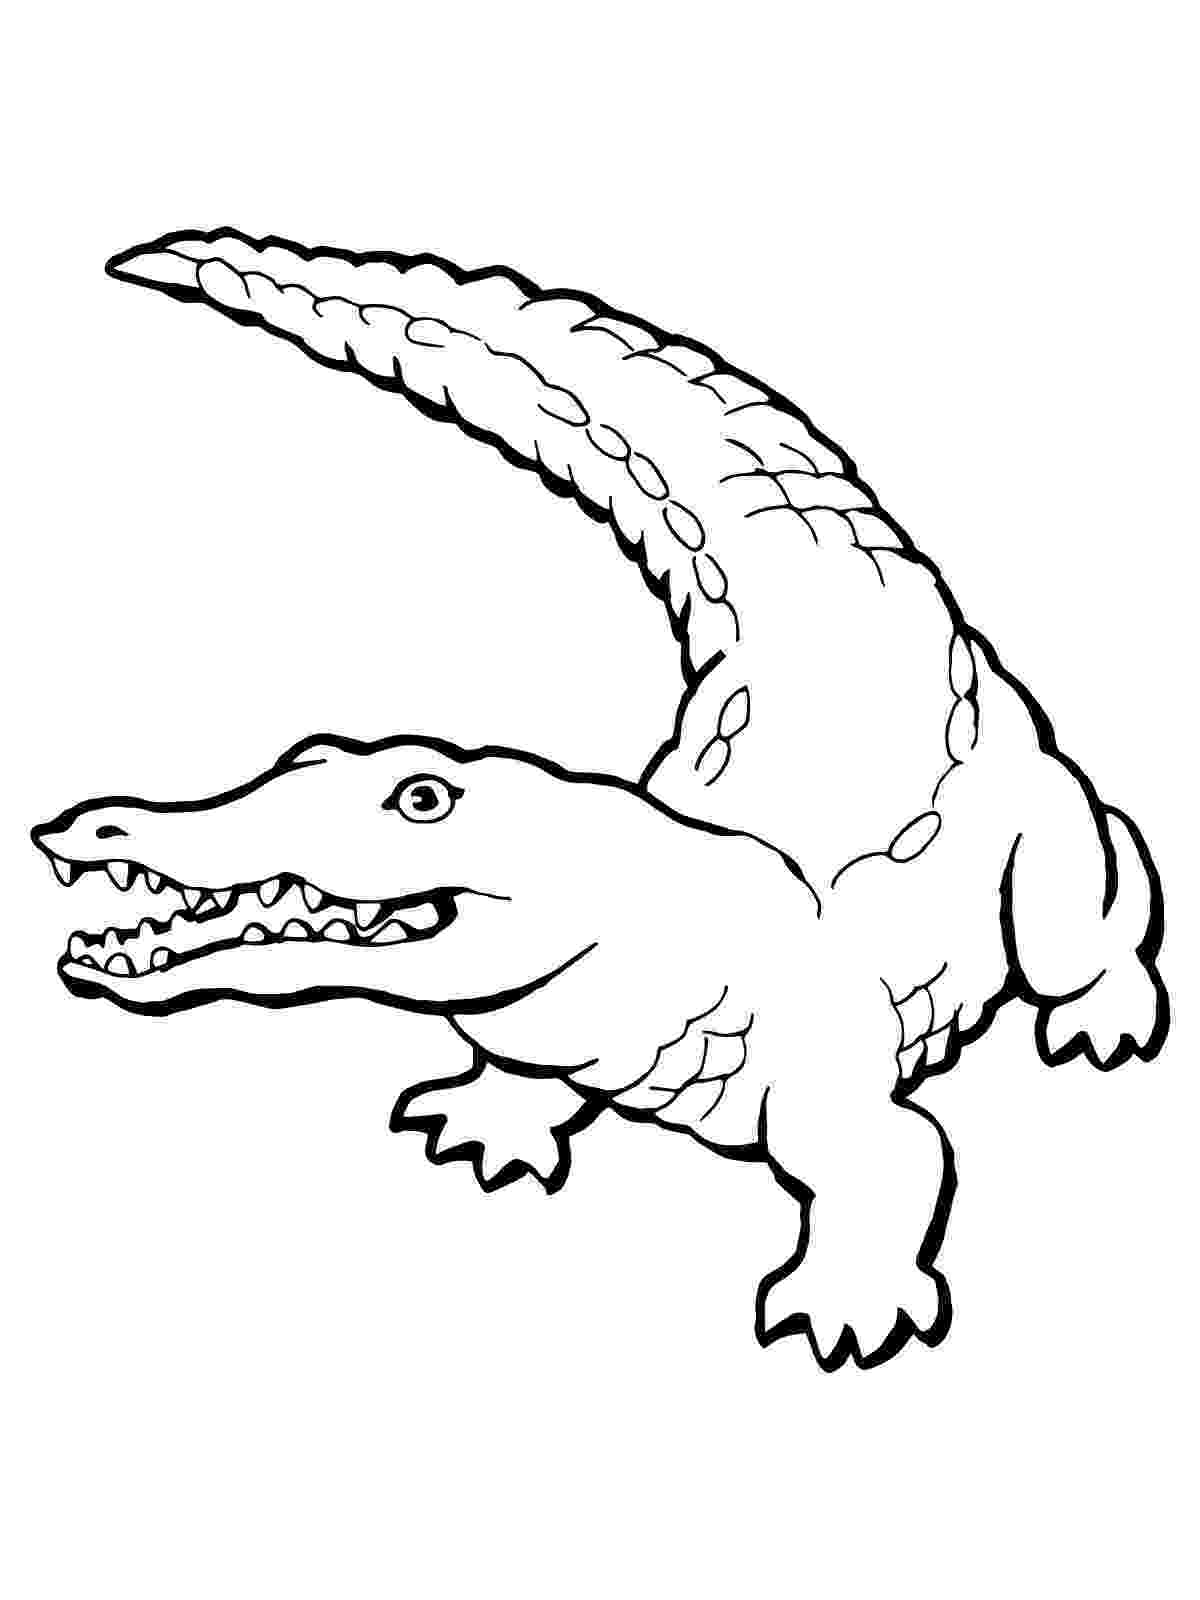 crocodile colouring pages free printable crocodile coloring pages for kids colouring pages crocodile 1 1